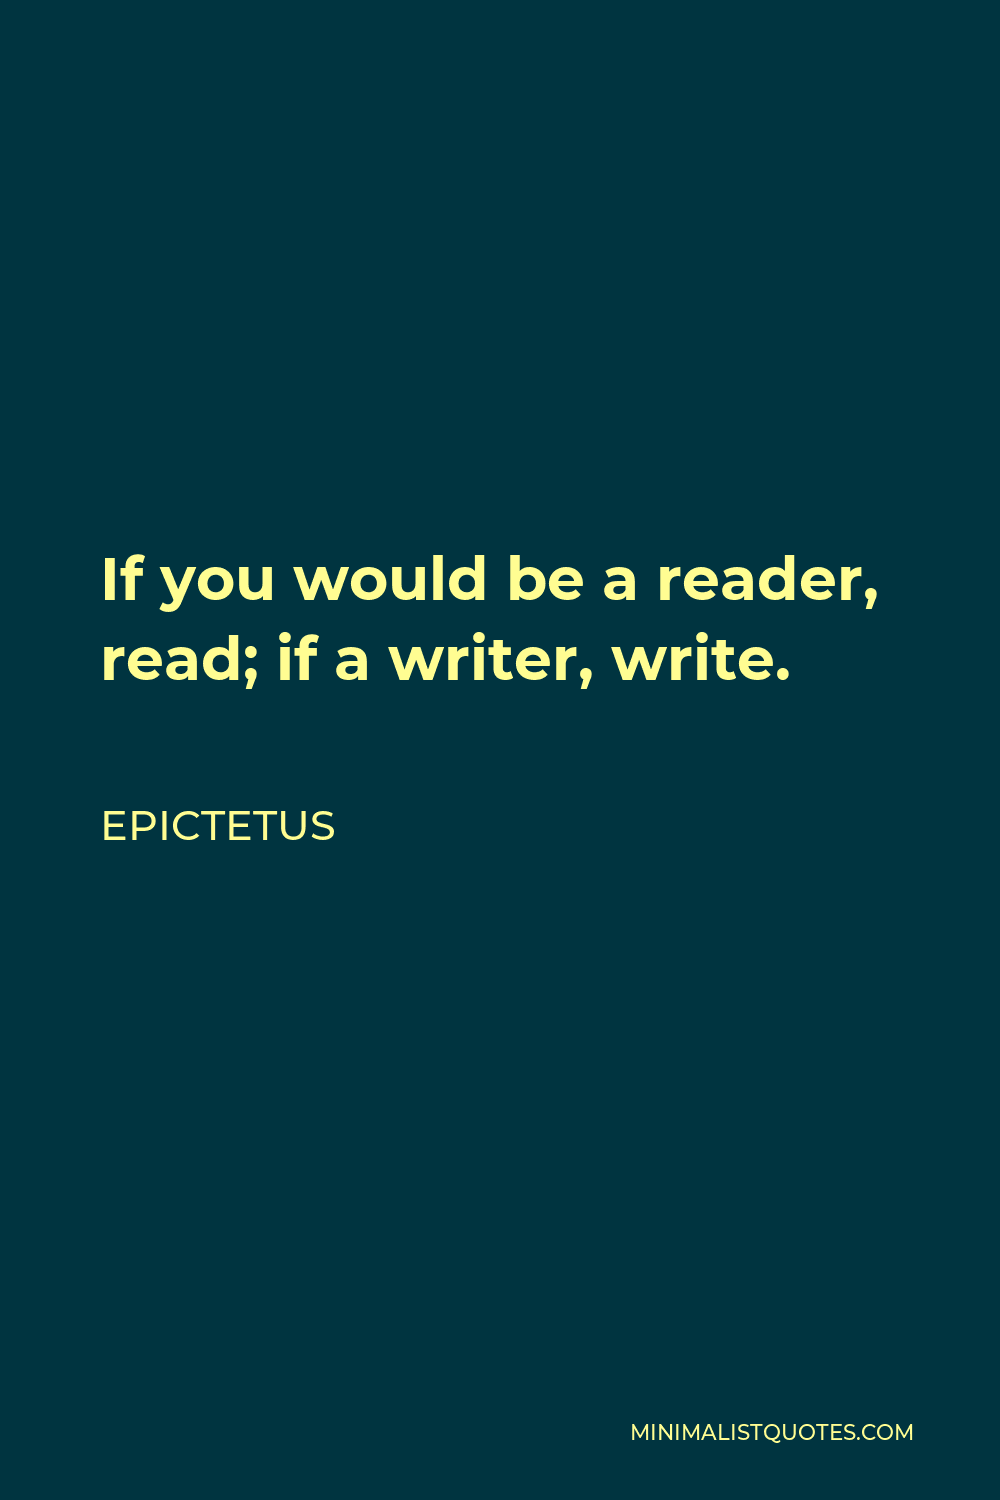 Epictetus Quote - If you would be a reader, read; if a writer, write.